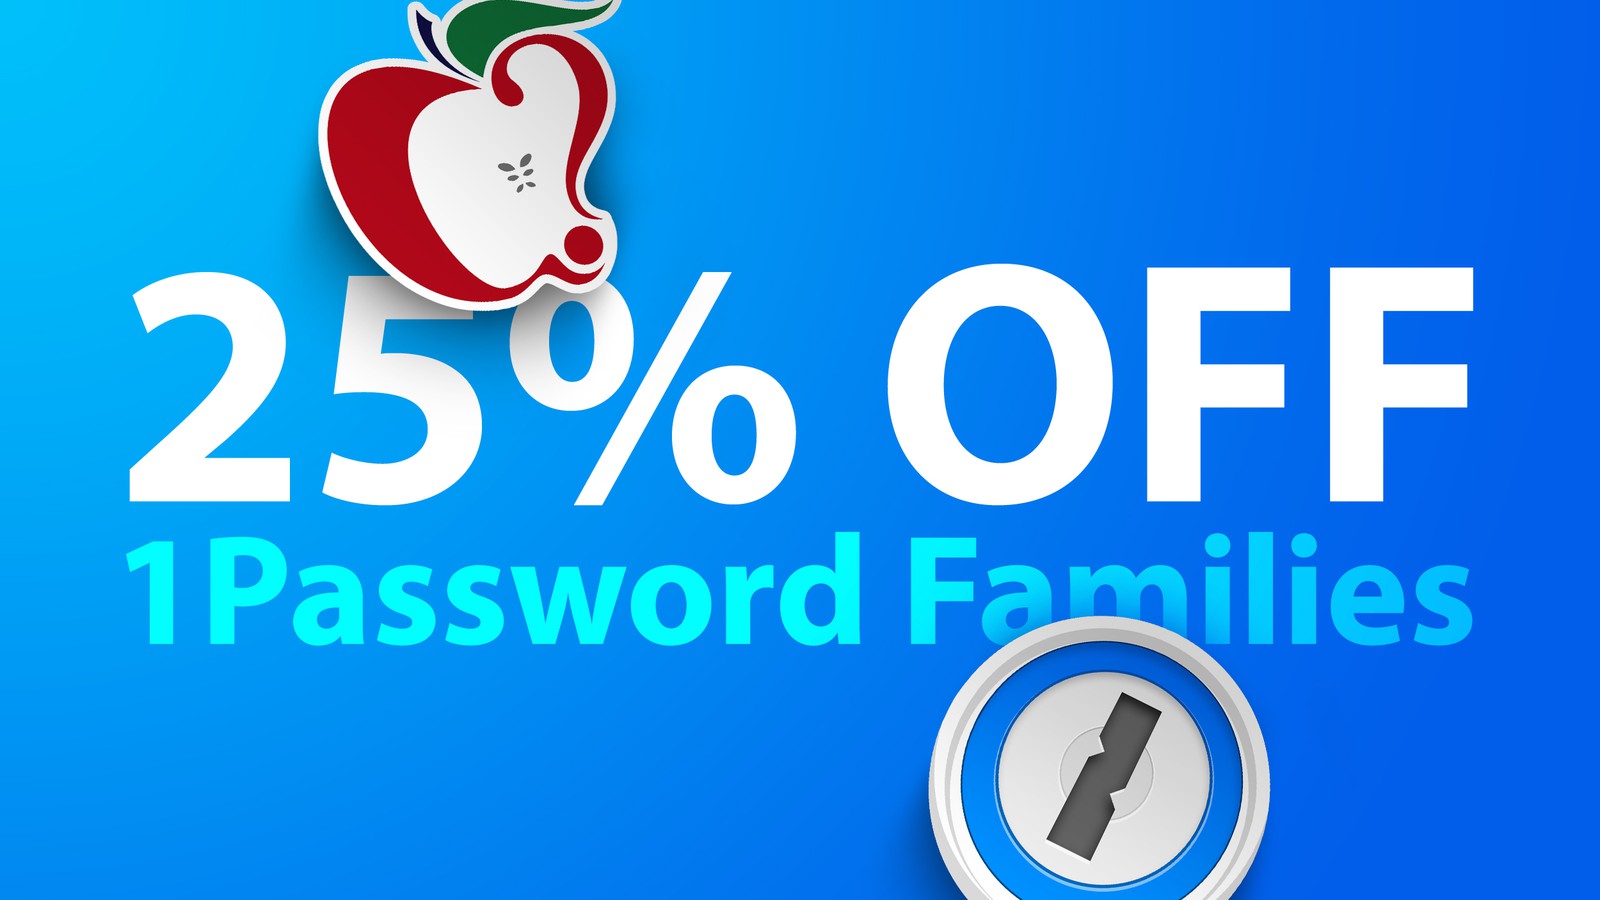 share 1password with family